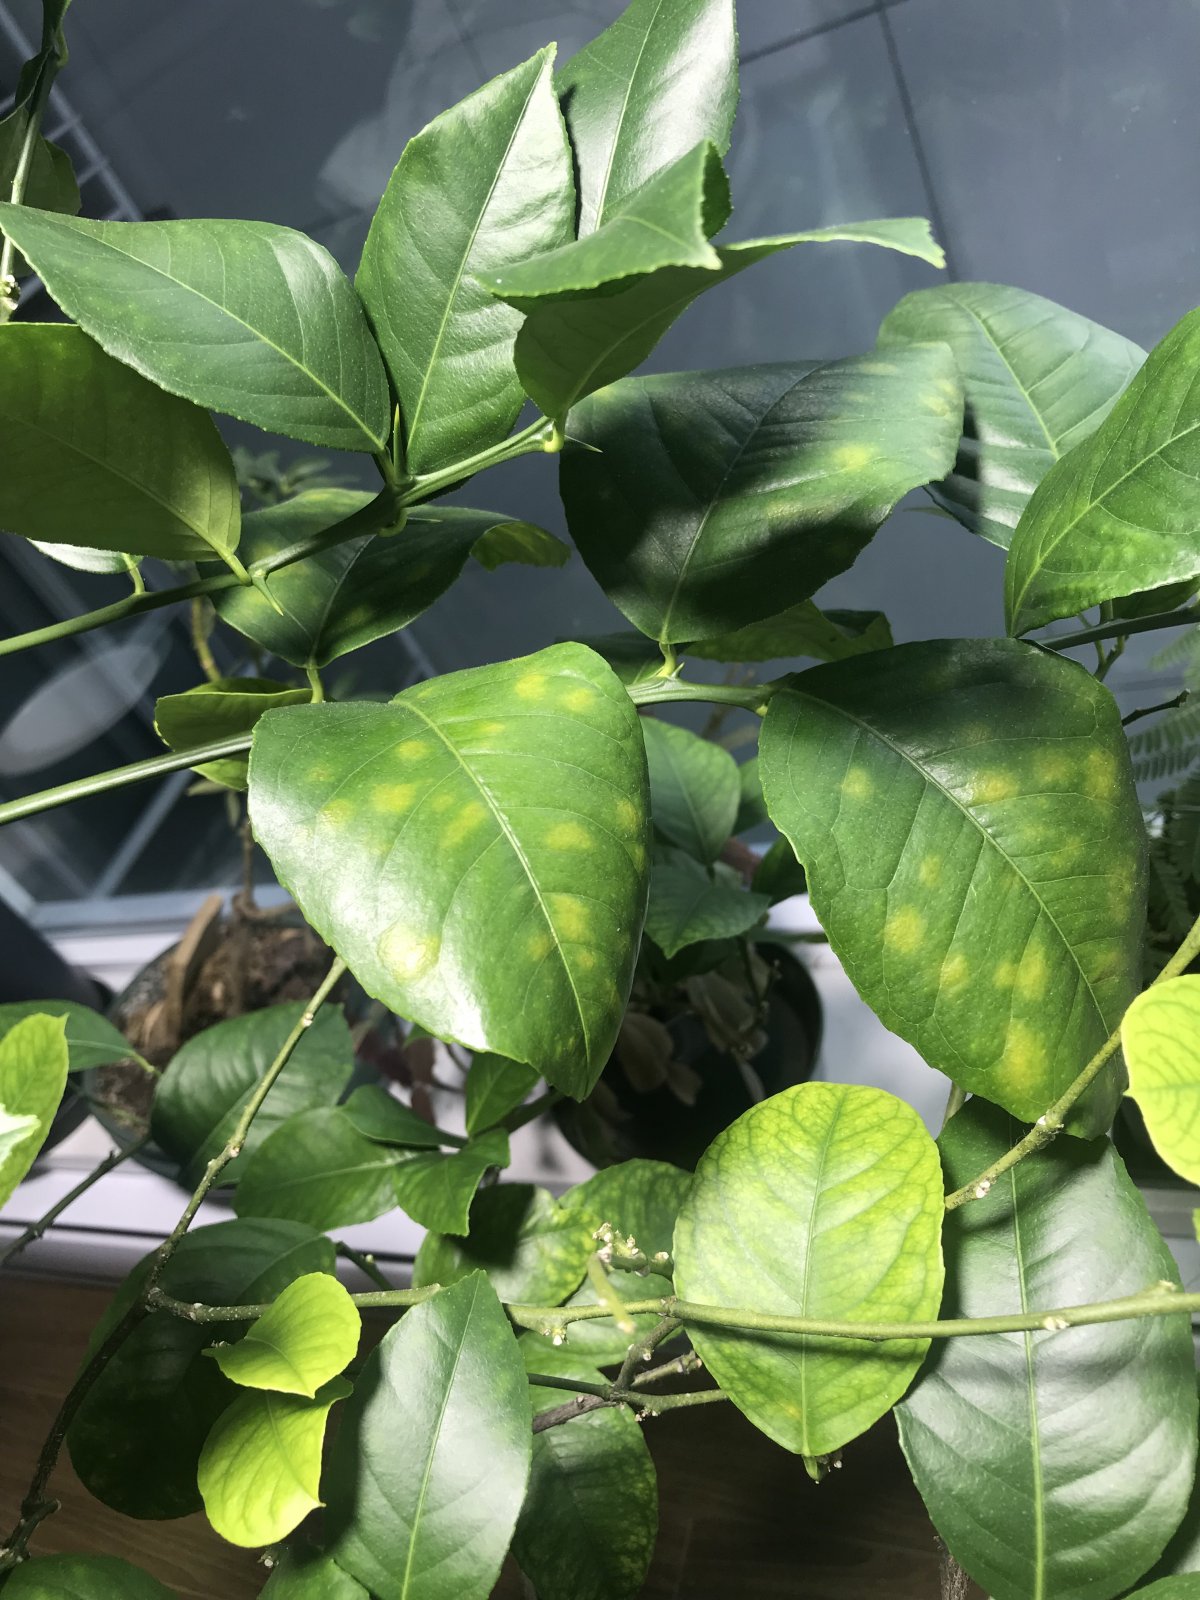 TWO Different Issues Causing Yellowing Leaves on Meyer Lemon Tree? | UBC  Botanical Garden Forums